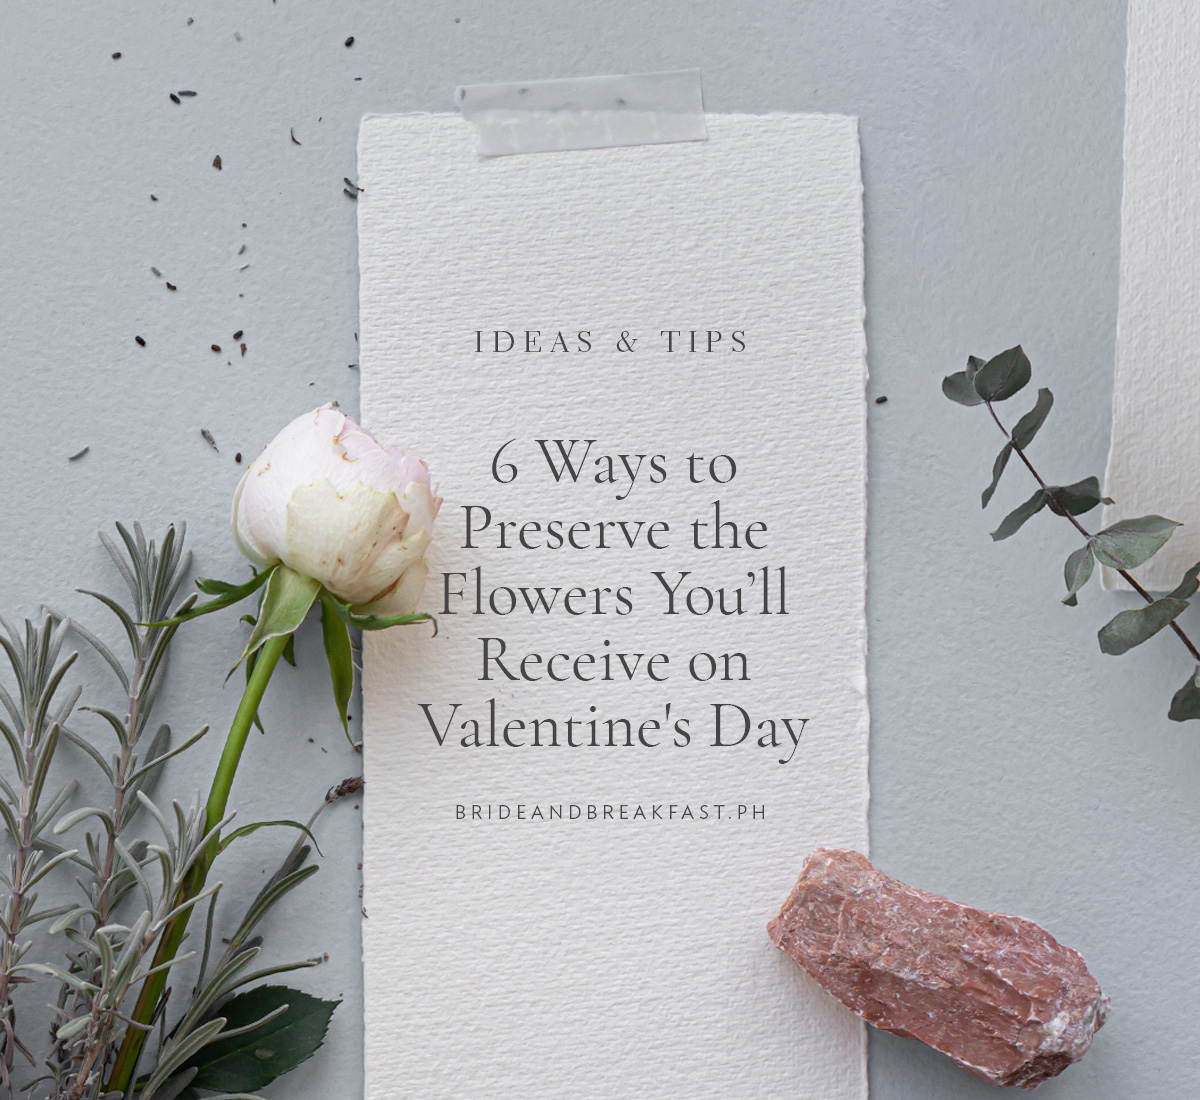 6 Ways to Preserve the Flowers You’ll Receive on Valentine's Day